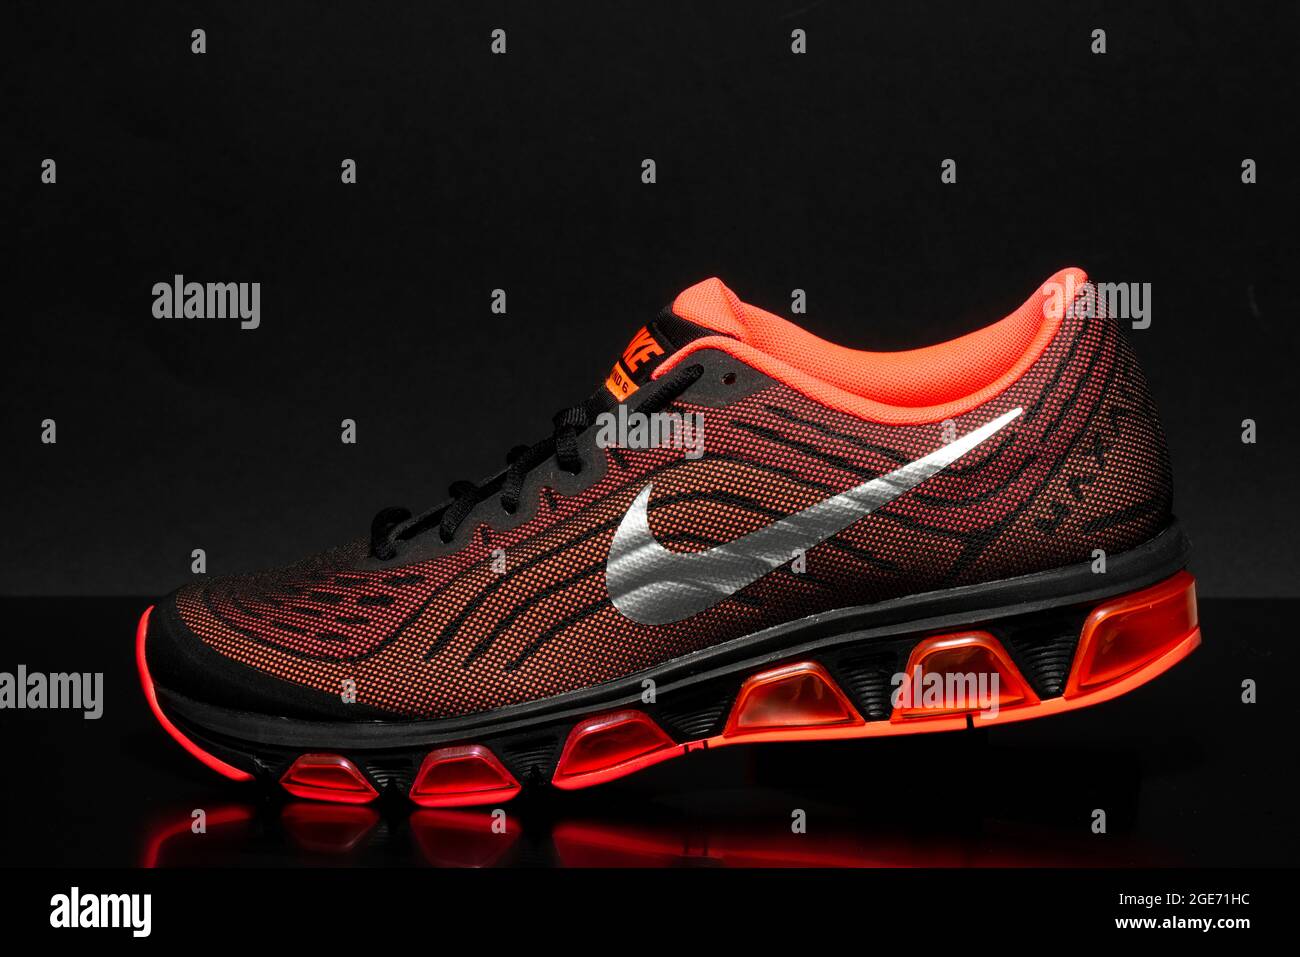 Orange Nike Air Max Tailwind 6 multi-color design men's trainers from 2013 on black Stock Photo